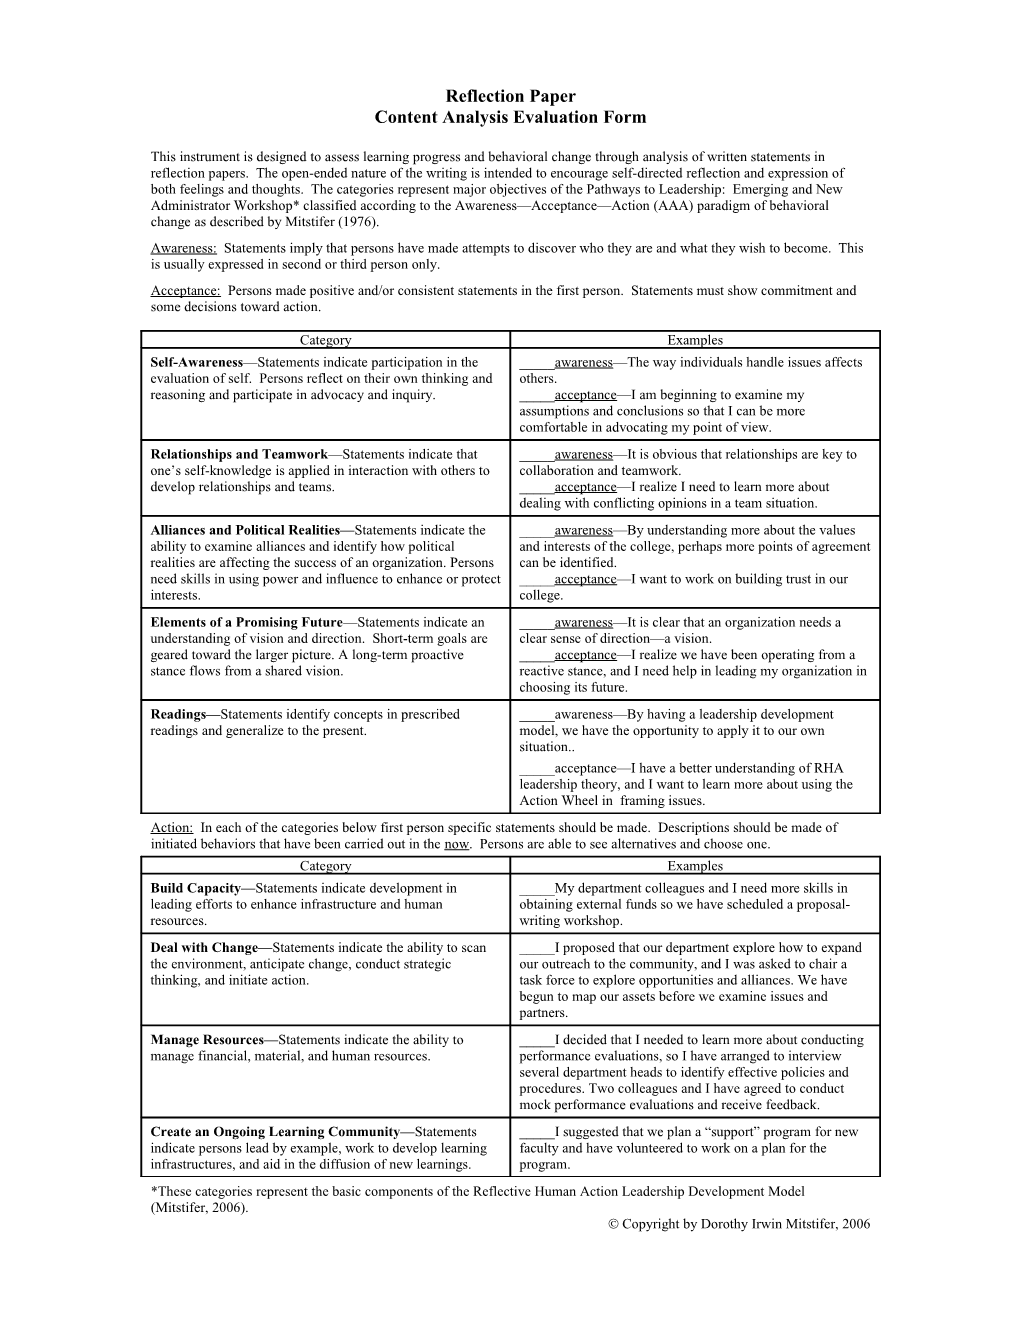 Content Analysis Evaluation Form